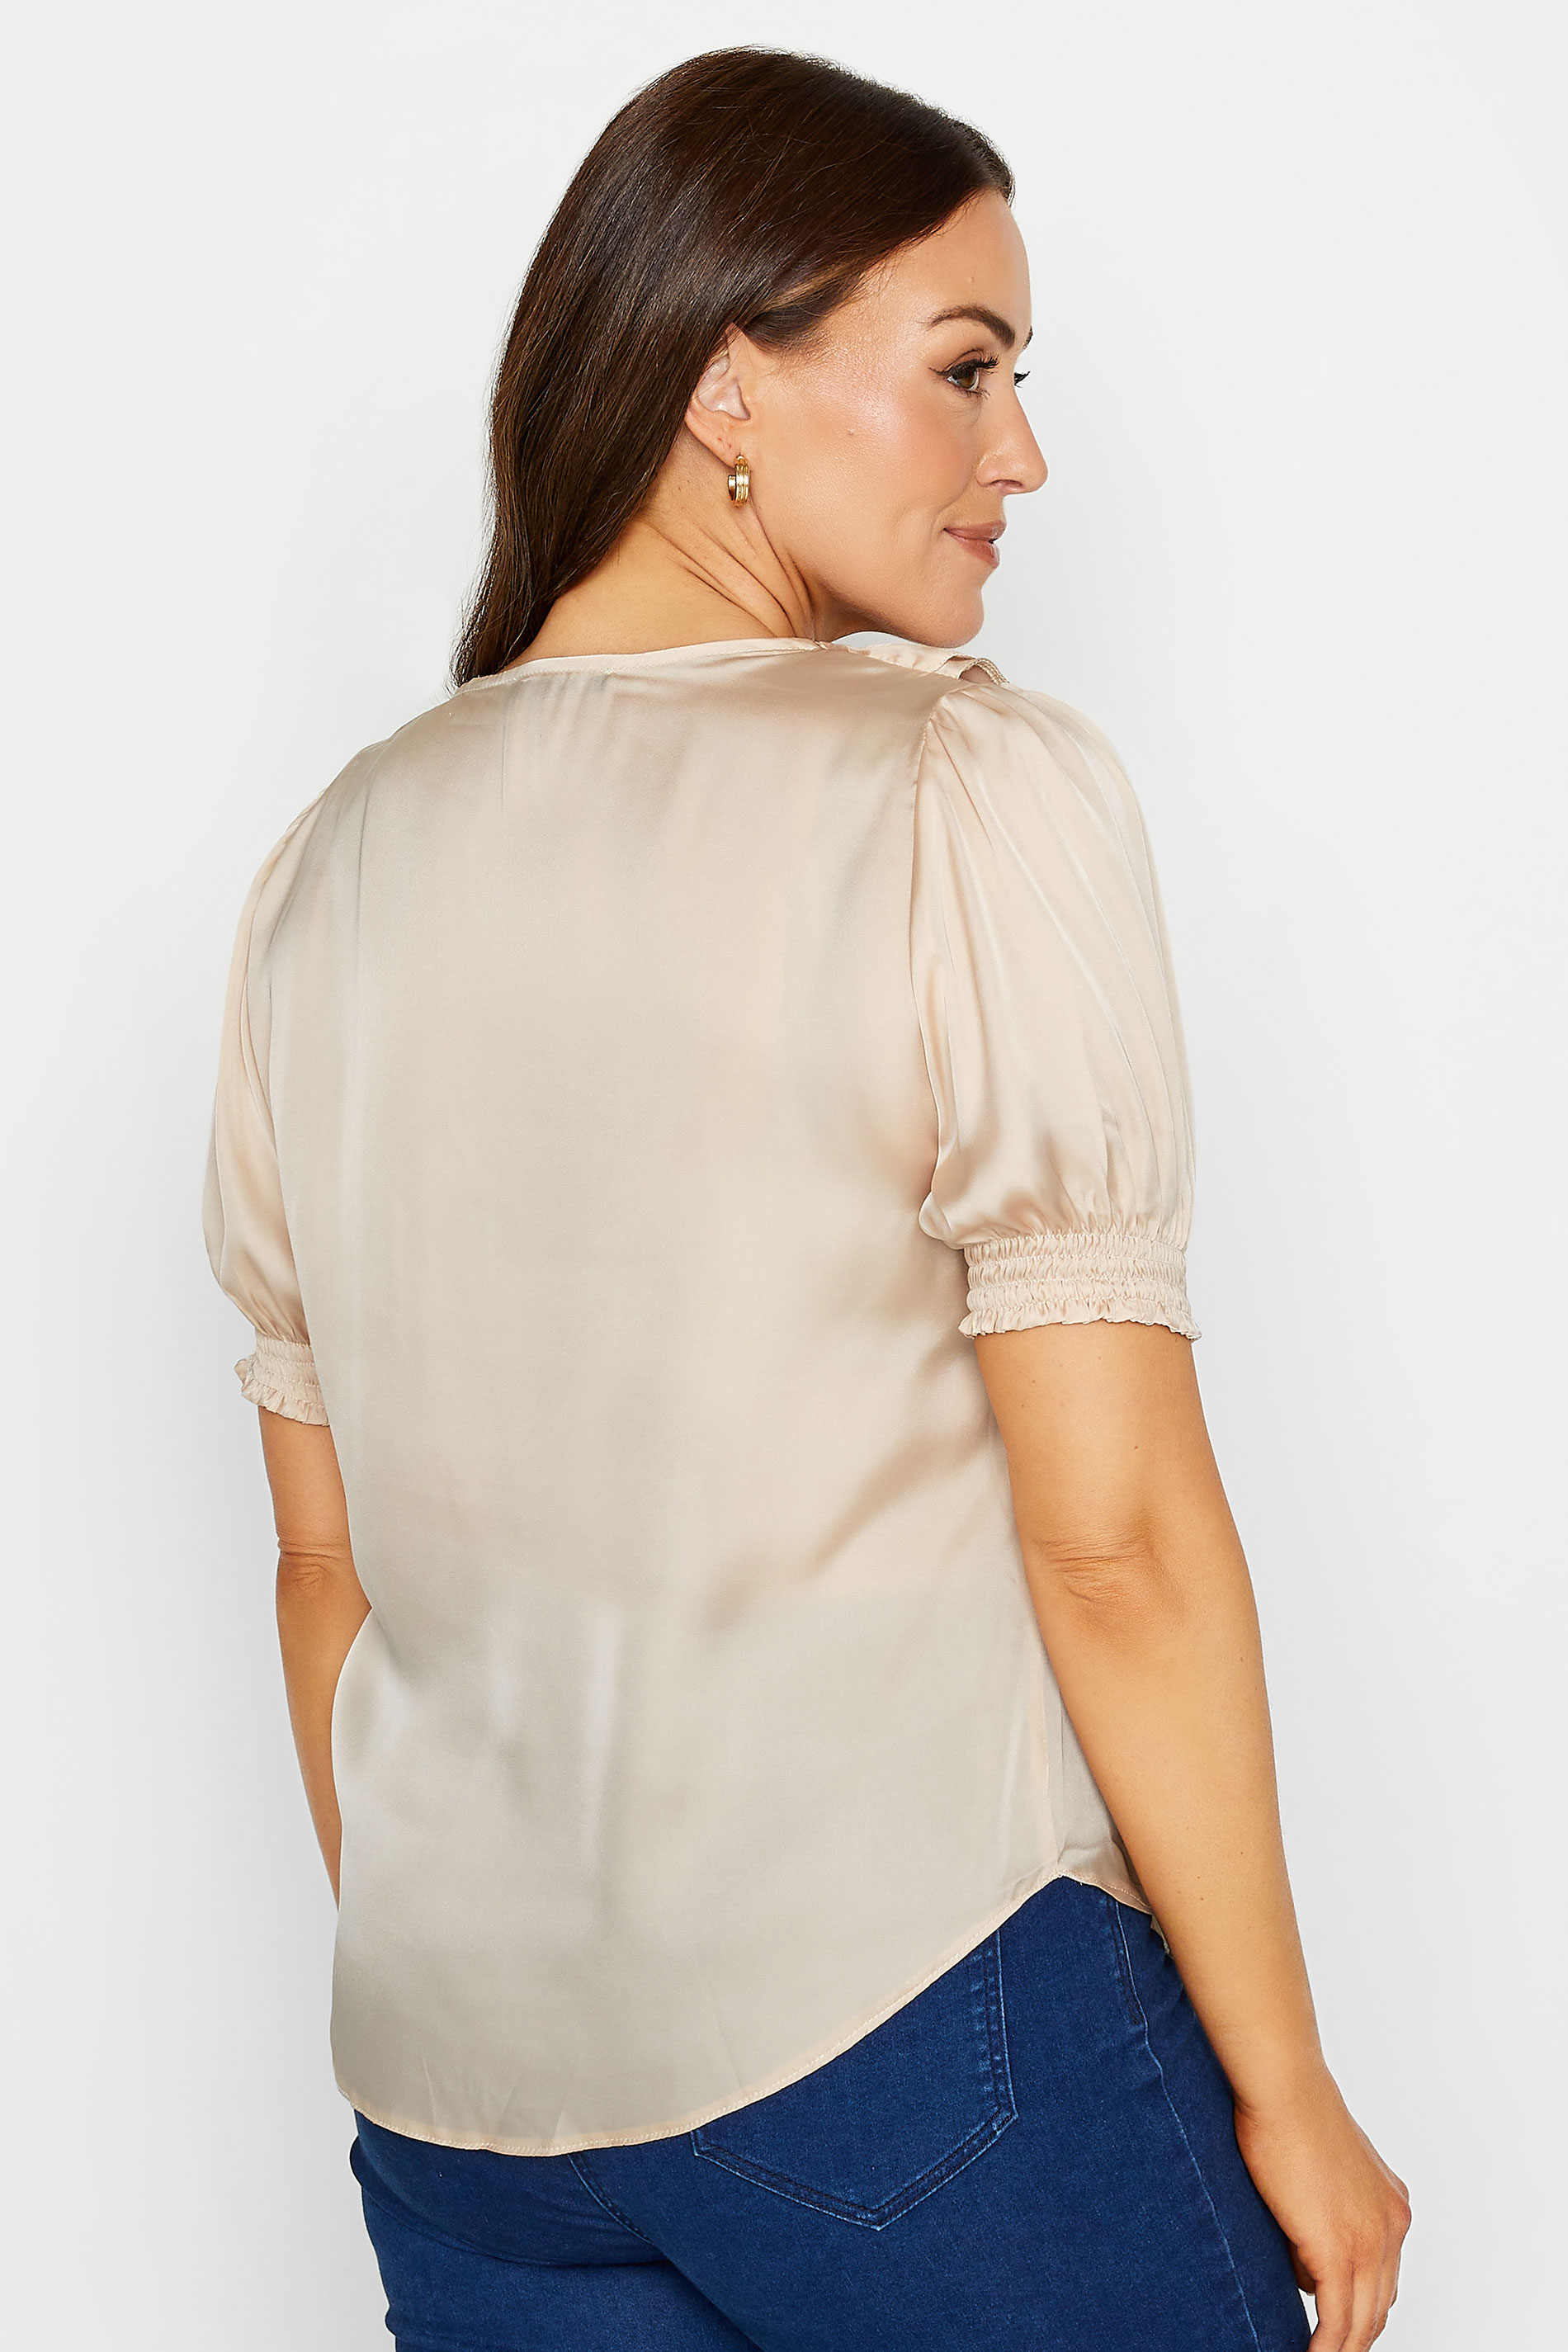 M&Co Nude Frill Front Blouse | M&Co 3